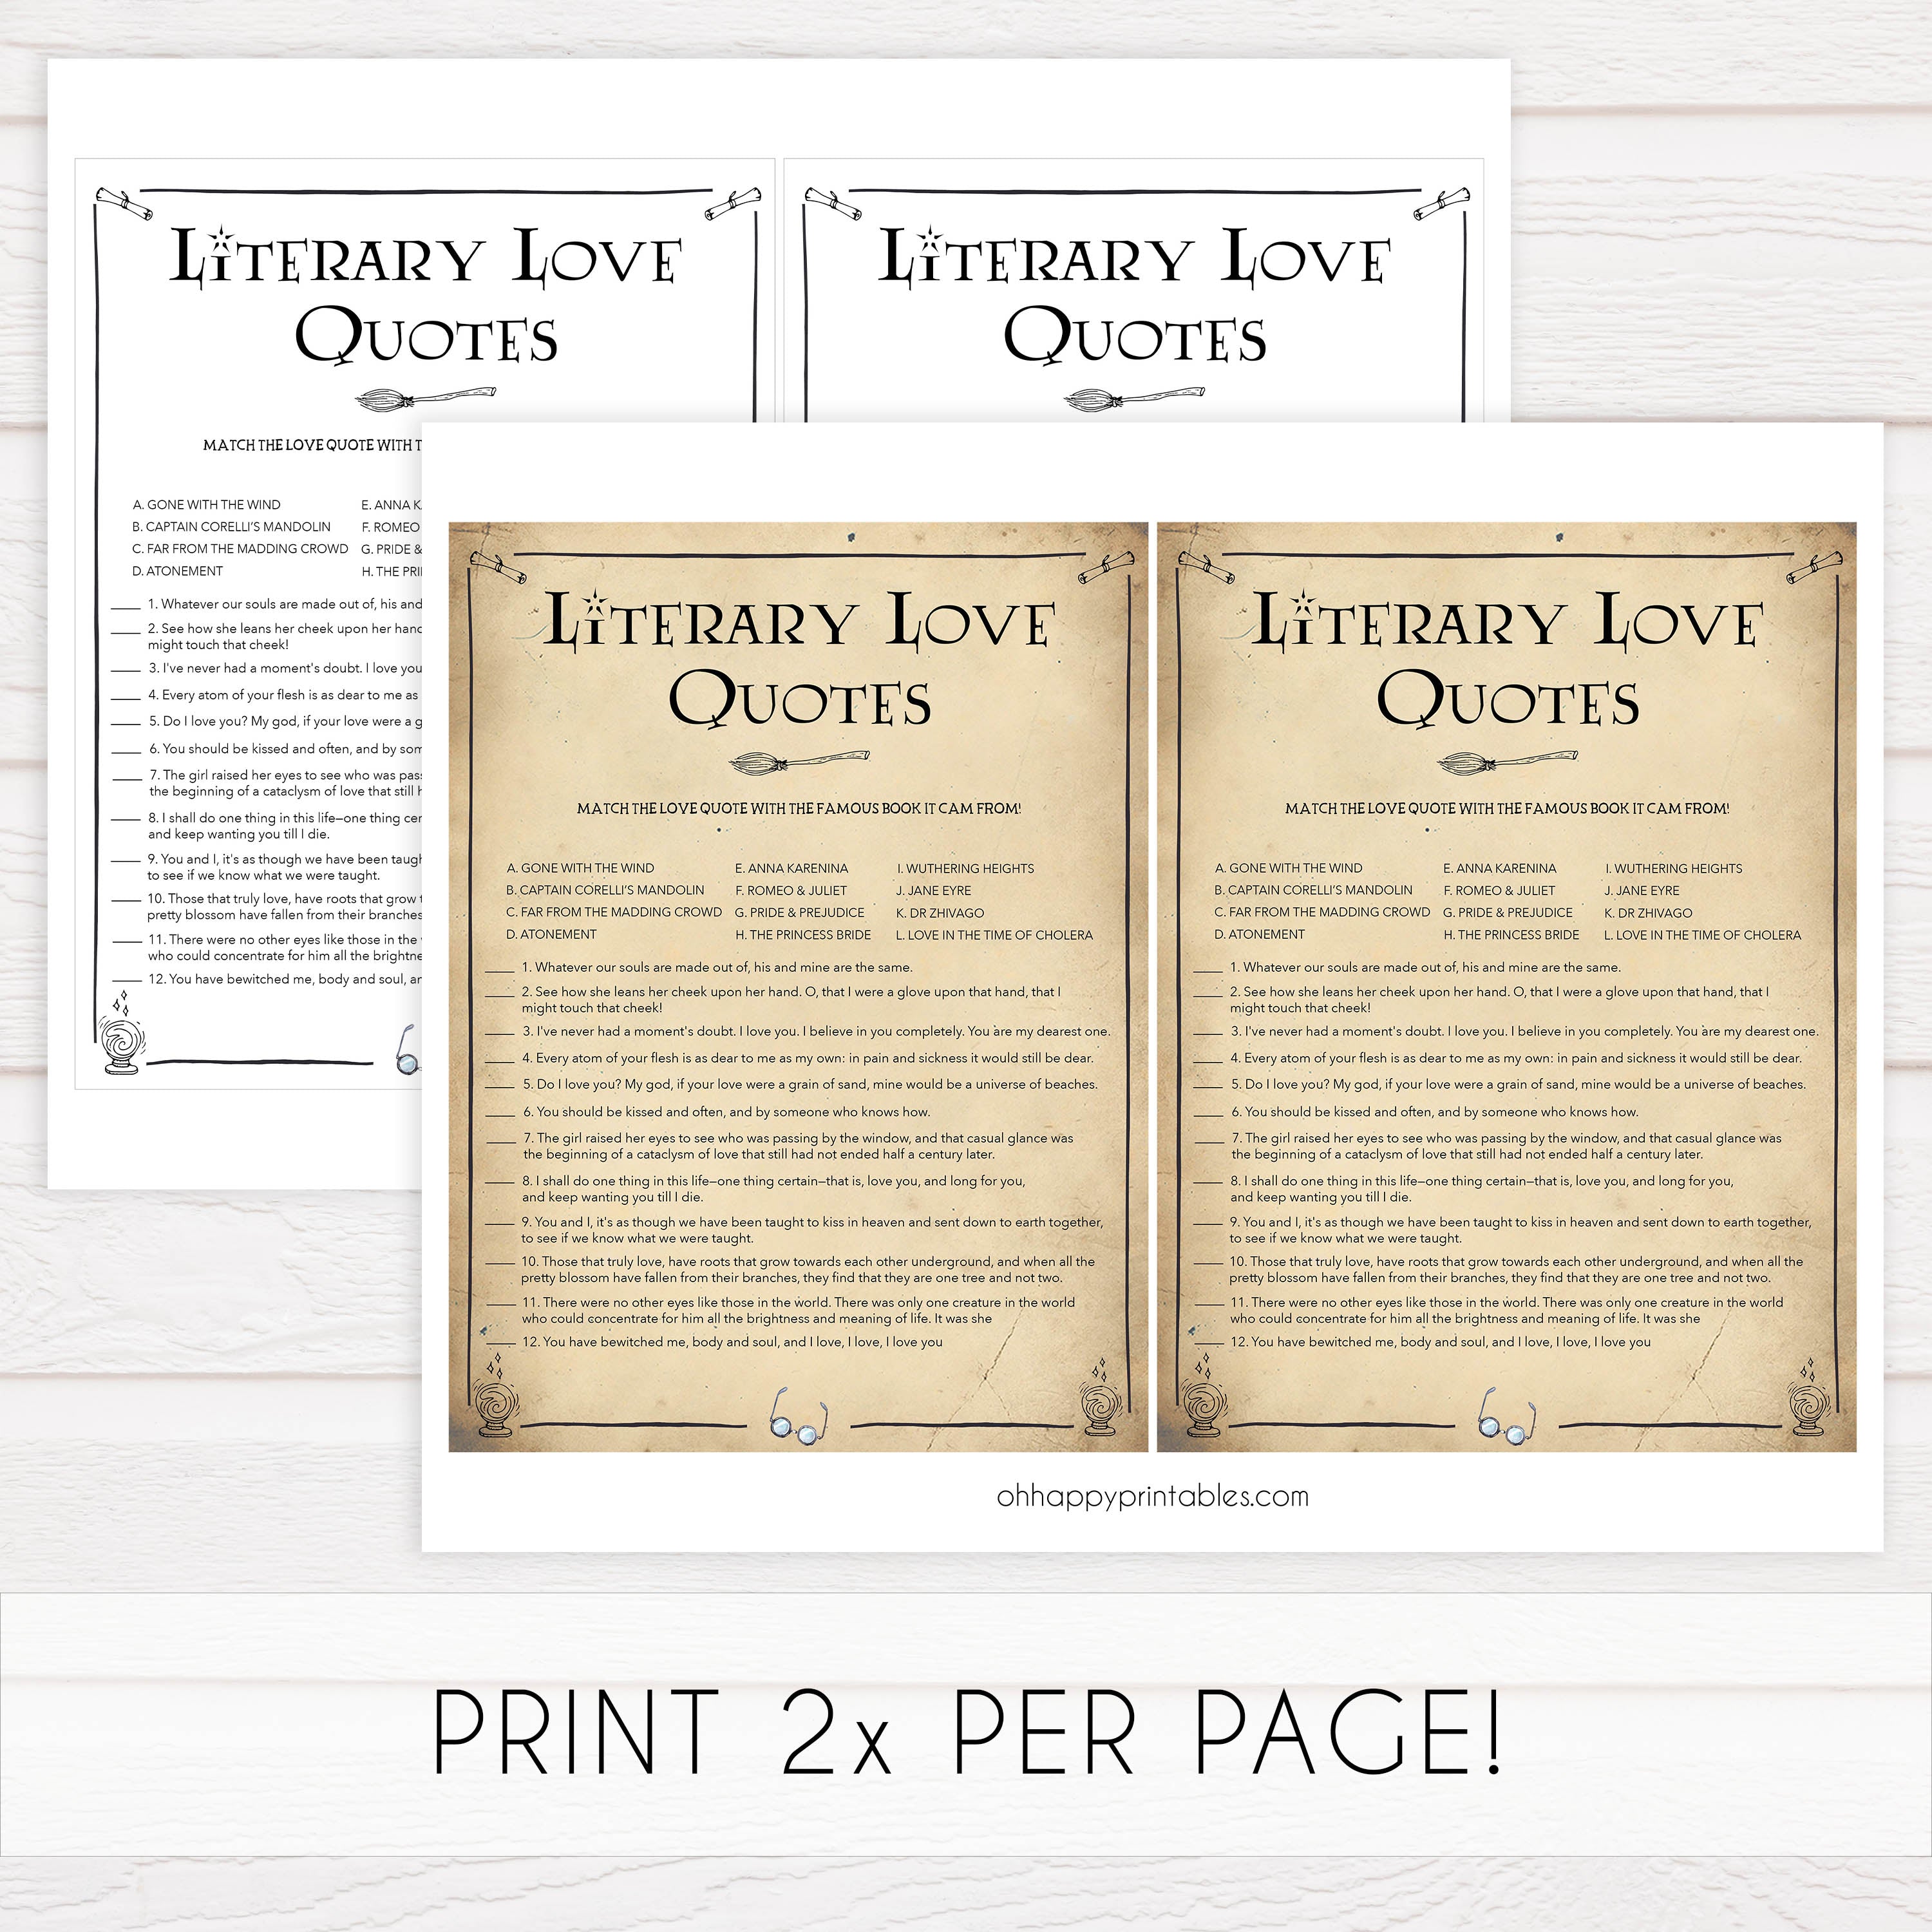 literary love quote game, bridal love quote game, Printable bridal shower games, Harry potter bridal shower, Harry Potter bridal shower games, fun bridal shower games, bridal shower game ideas, Harry Potter bridal shower